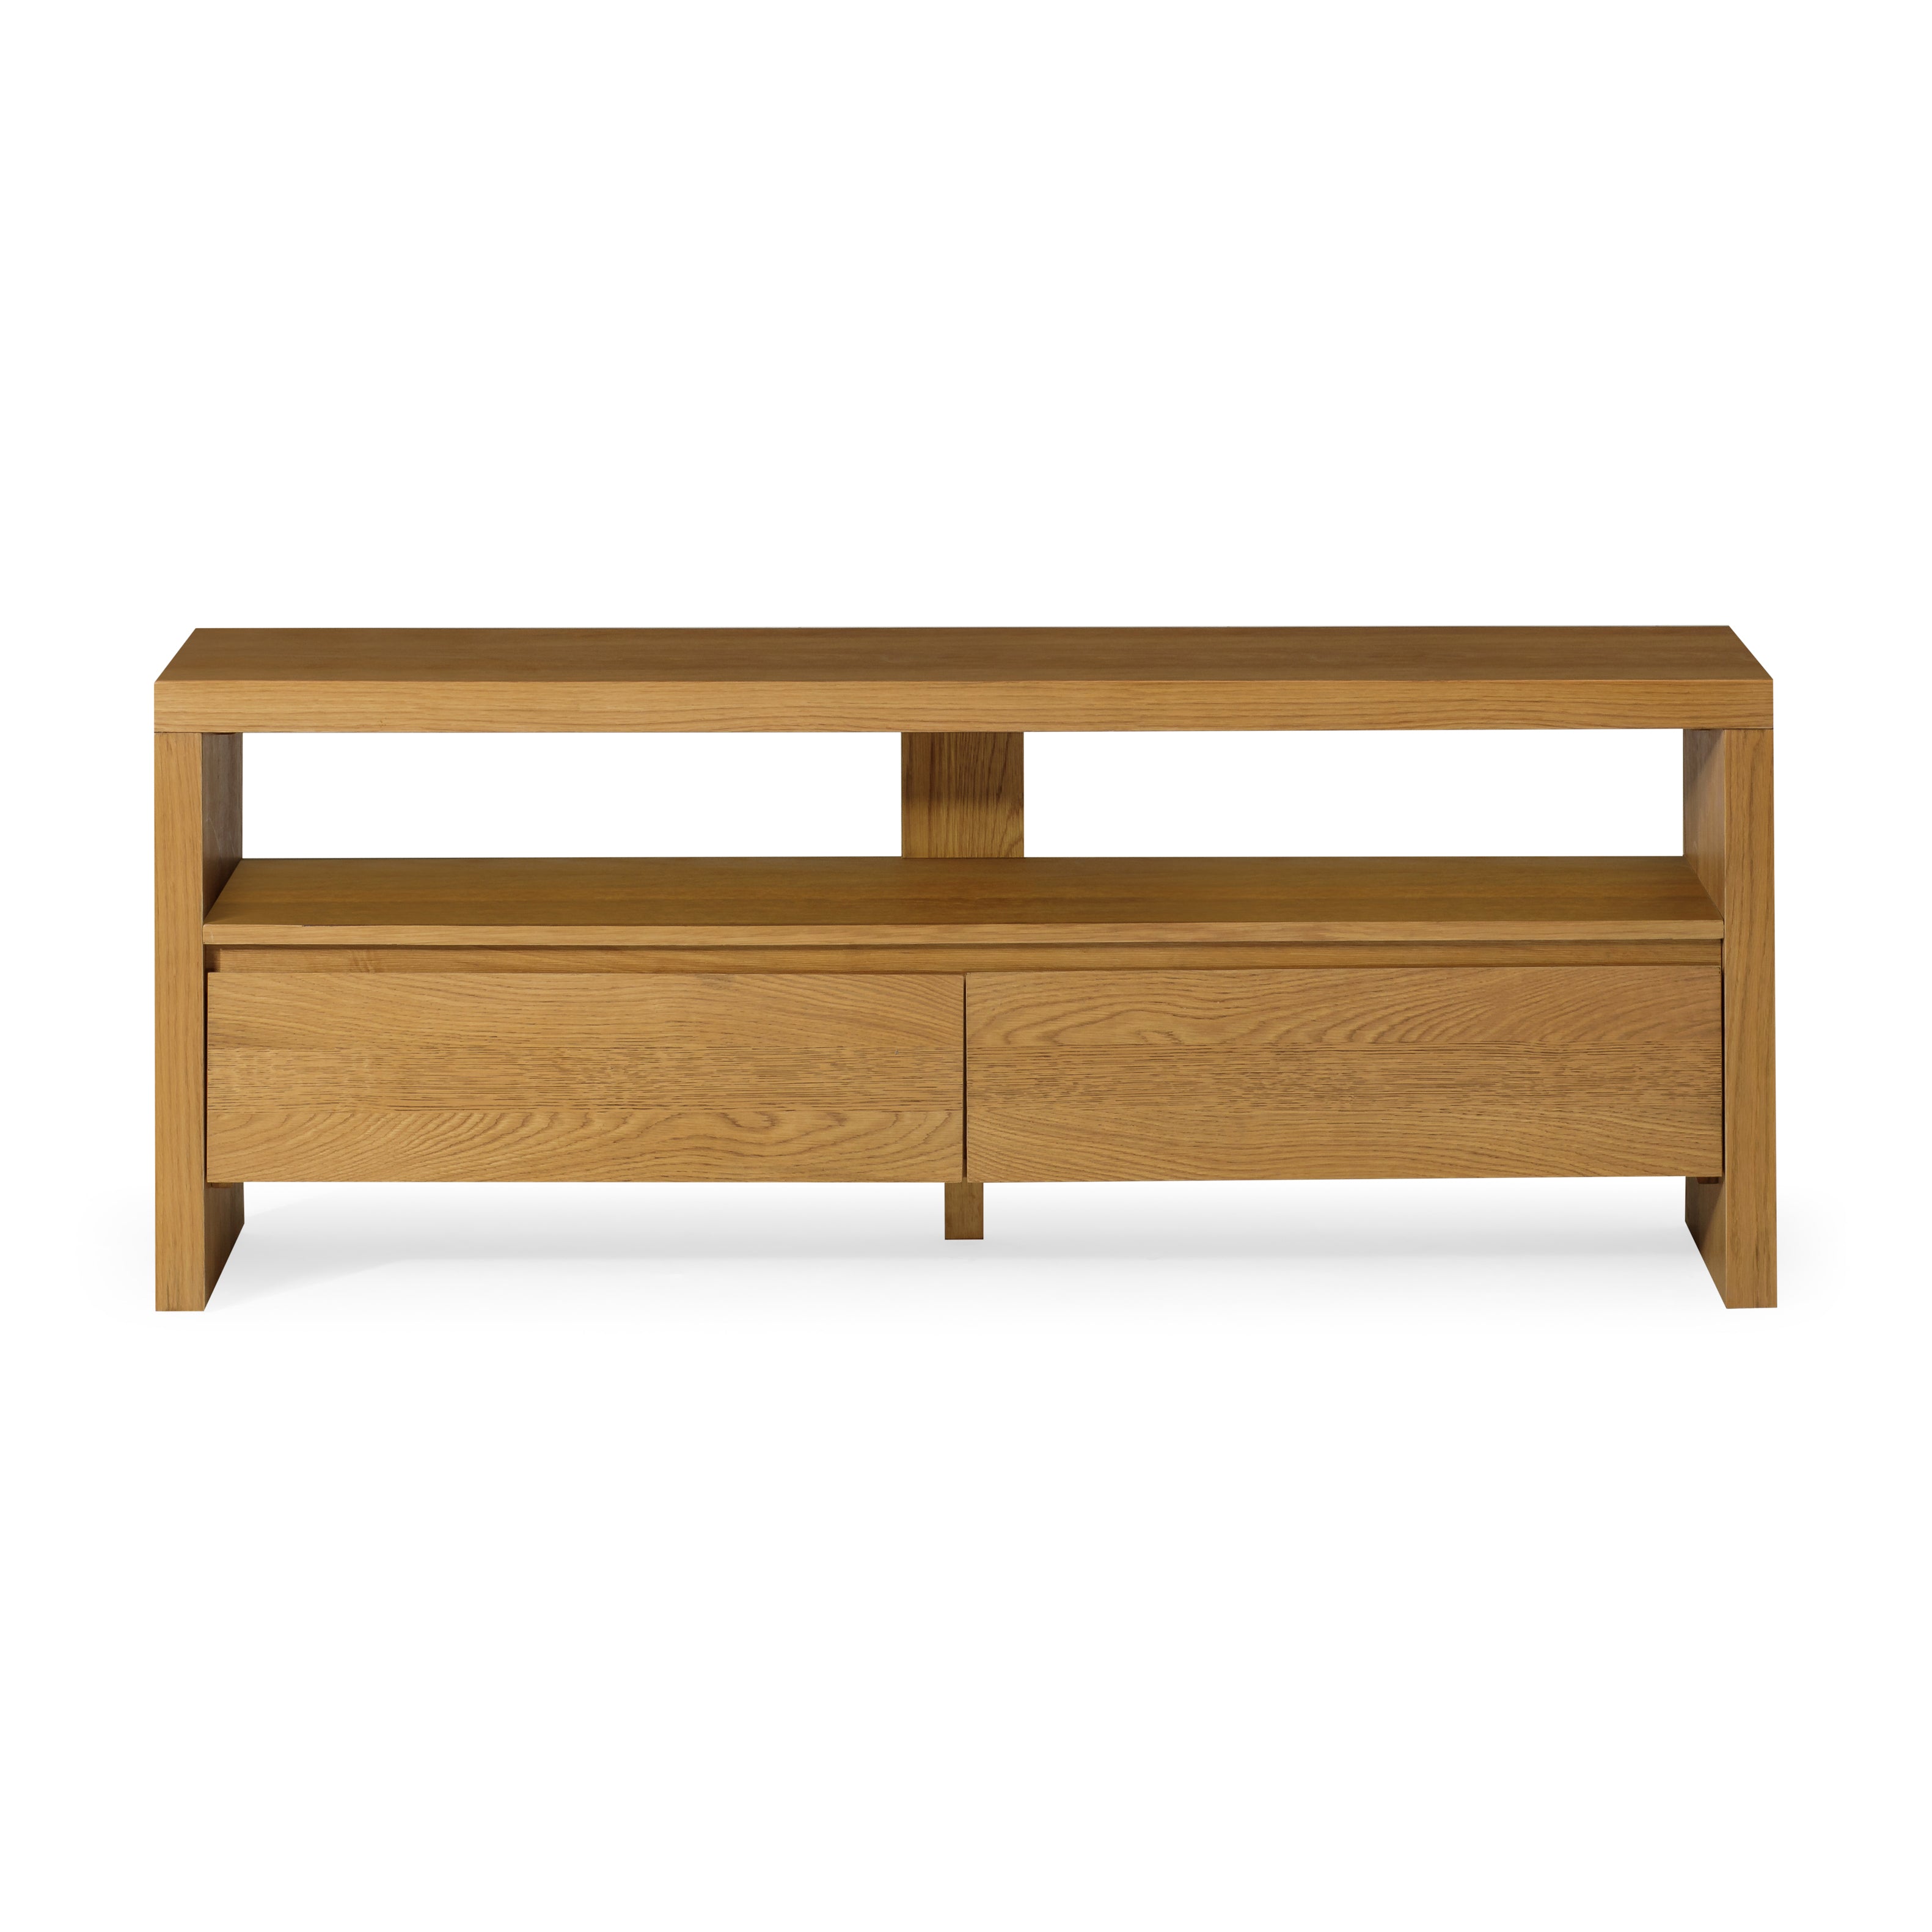 Ada Contemporary Wooden Media Unit in Refined Natural Finish in Media Units by Maven Lane